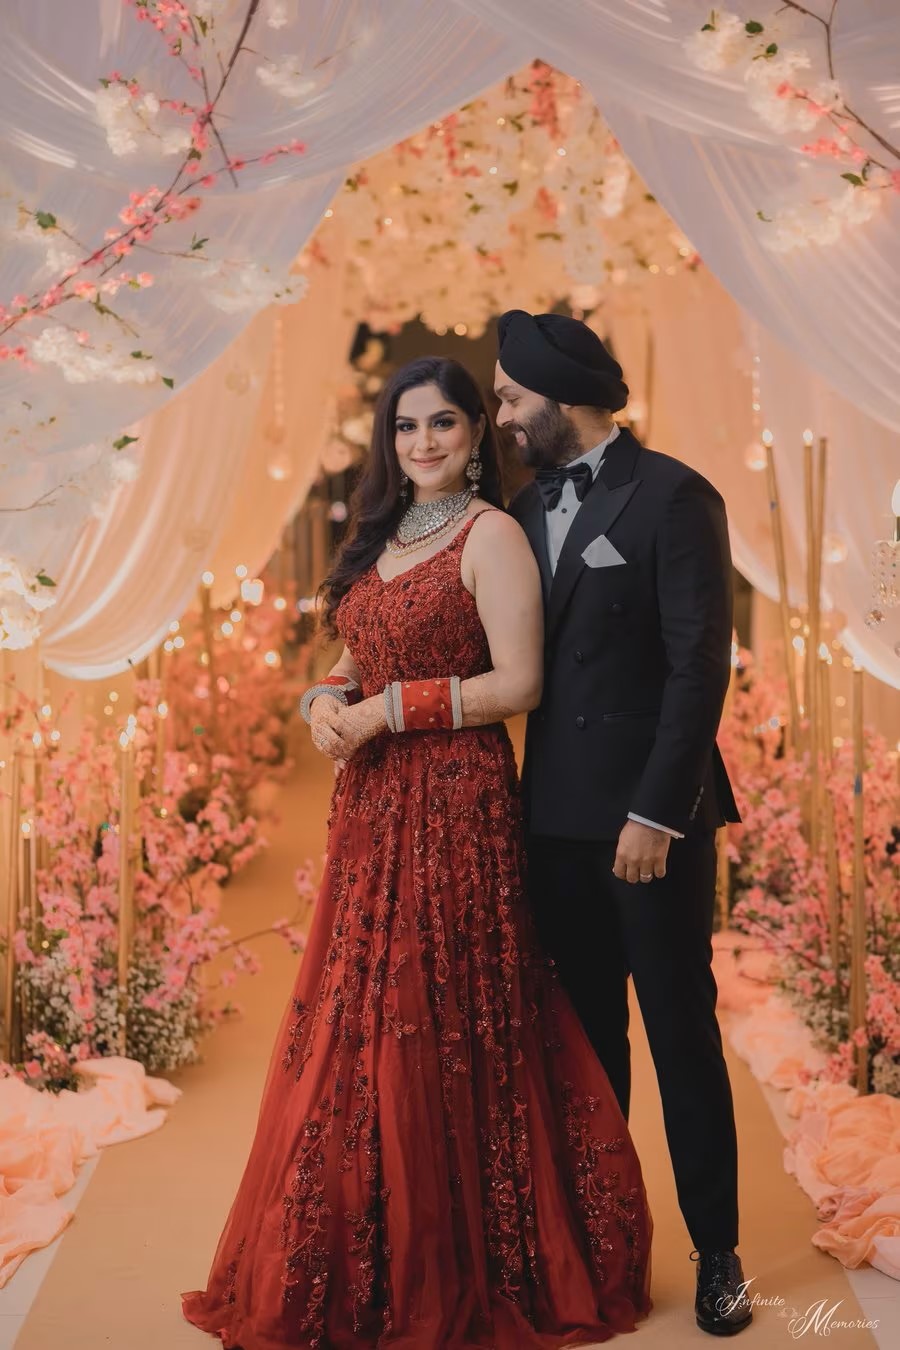 reception bride in designer red gown with embroidery work